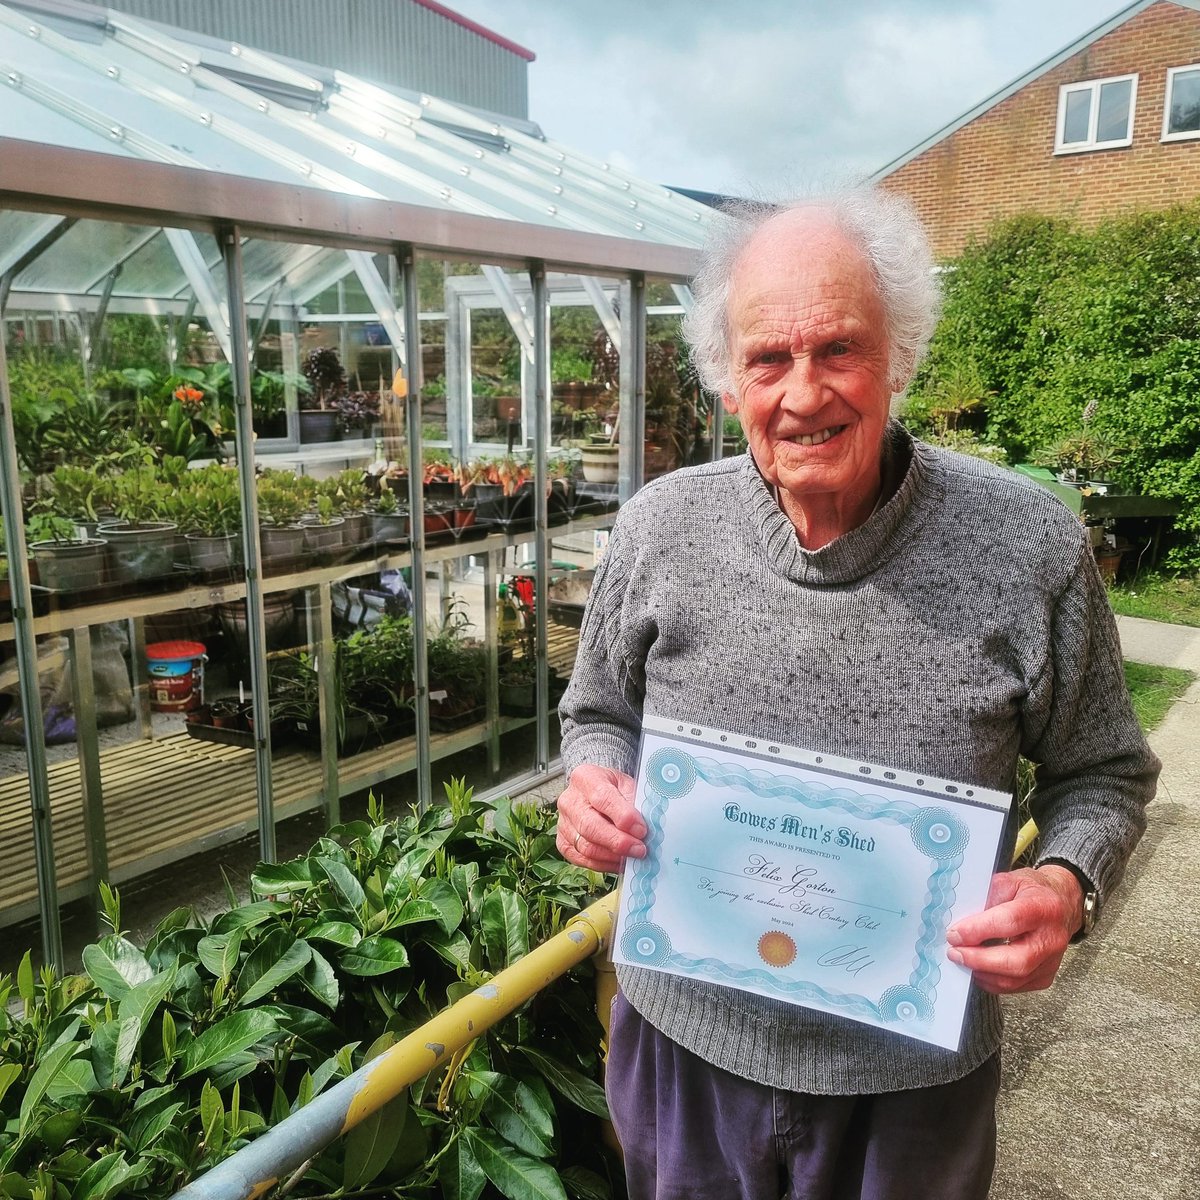 Congrats to Felix for joining the exclusive 'Shed Century Club' for having attended on, at least, 100 separate occasions 🎈 🙂

#meninsheds #mentalhealth #wellbeing #isleofwight #NationalLottery @TNLComFund @WestonFdn @Storeroom2010